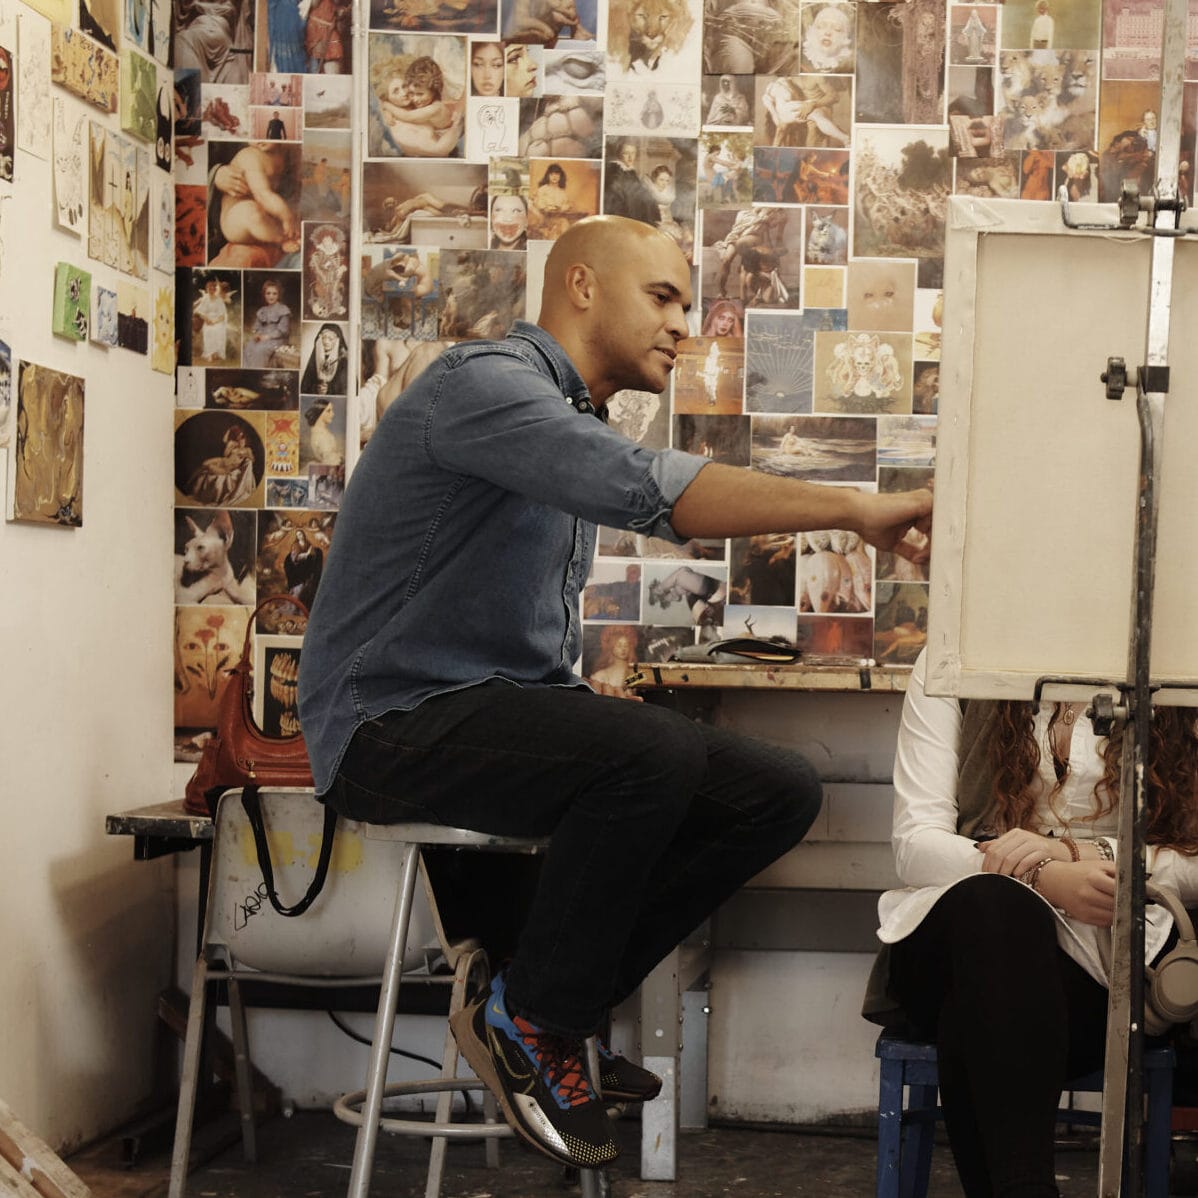 A faculty member sits on a stool in a student's painting studio, offering feedback on their work.